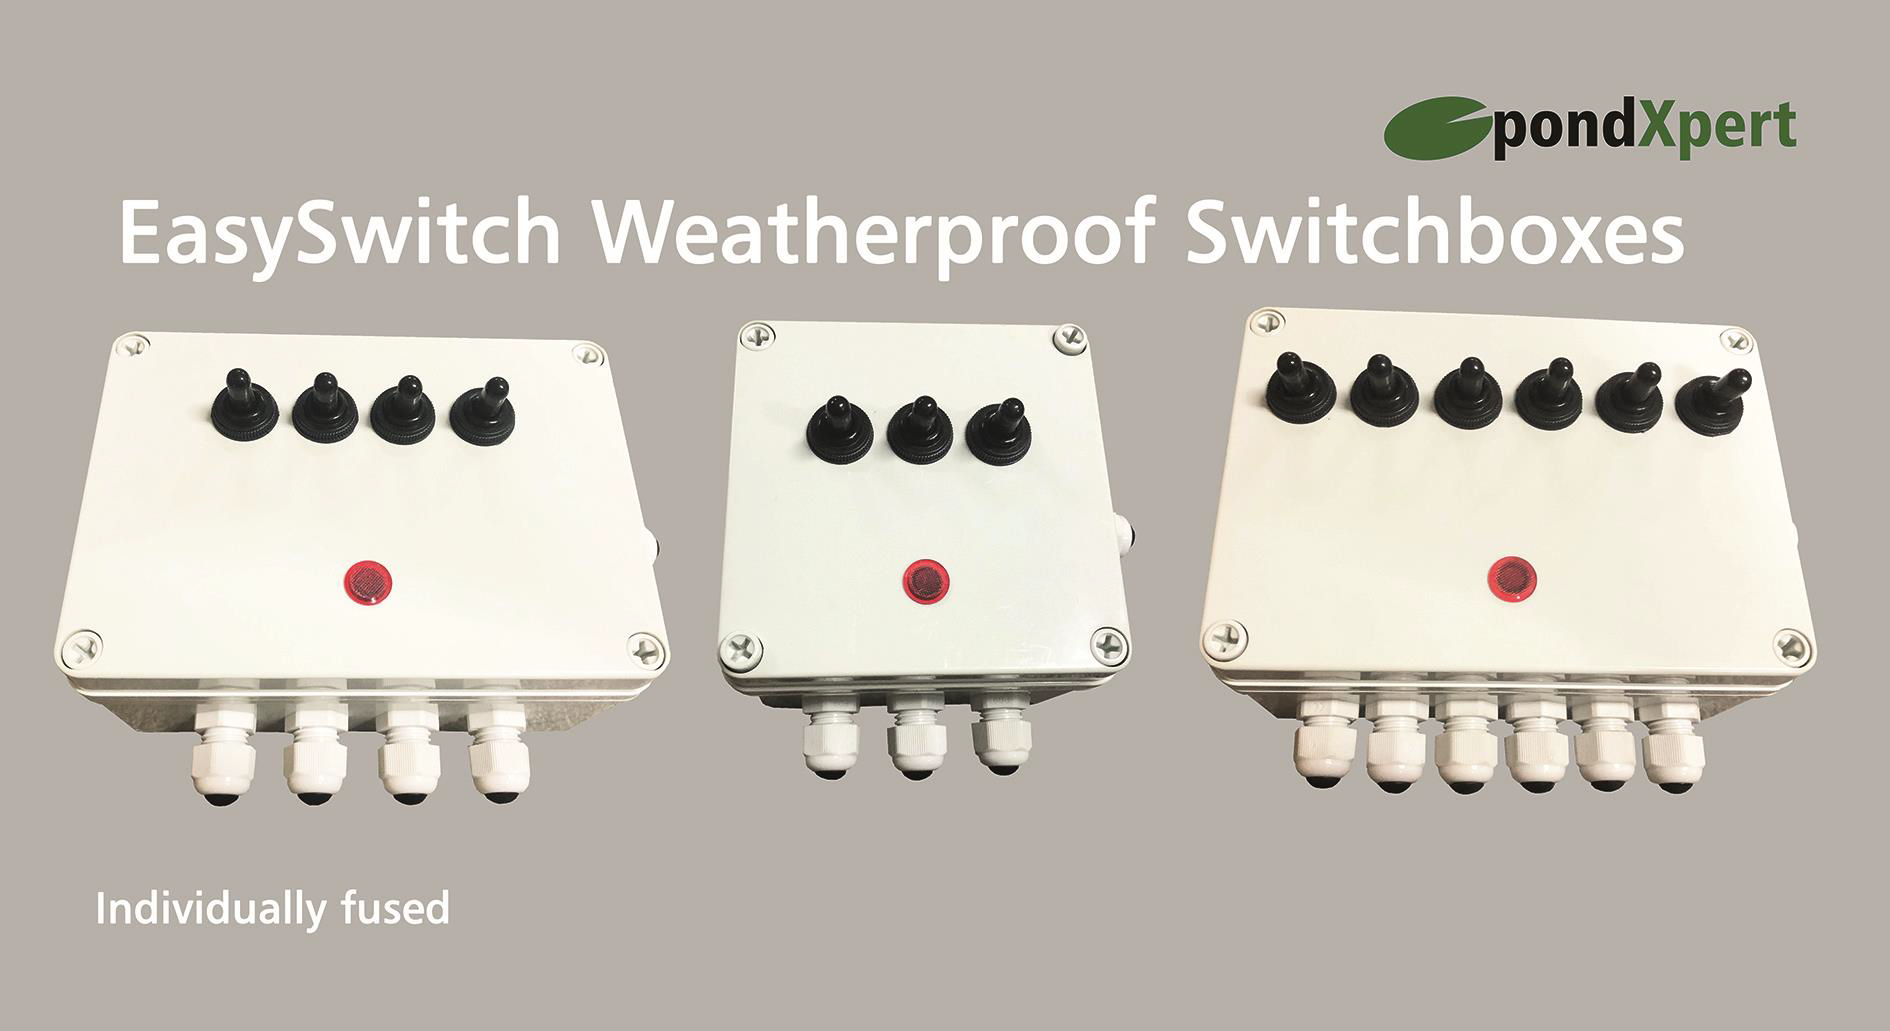 Pond expert easyway switchboxes